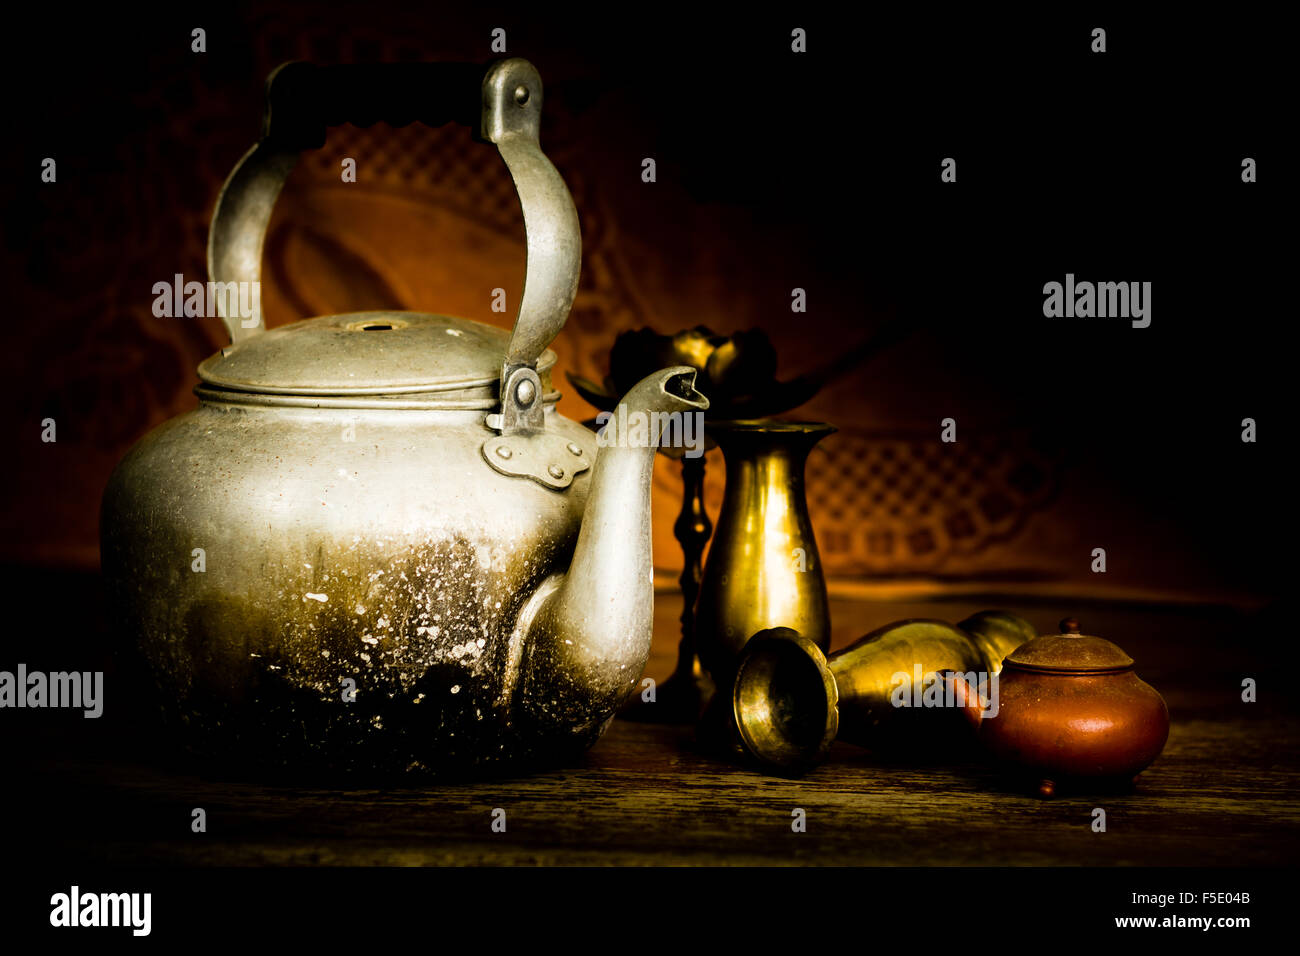 Still life with Candlesticks, vases and teapots Stock Photo